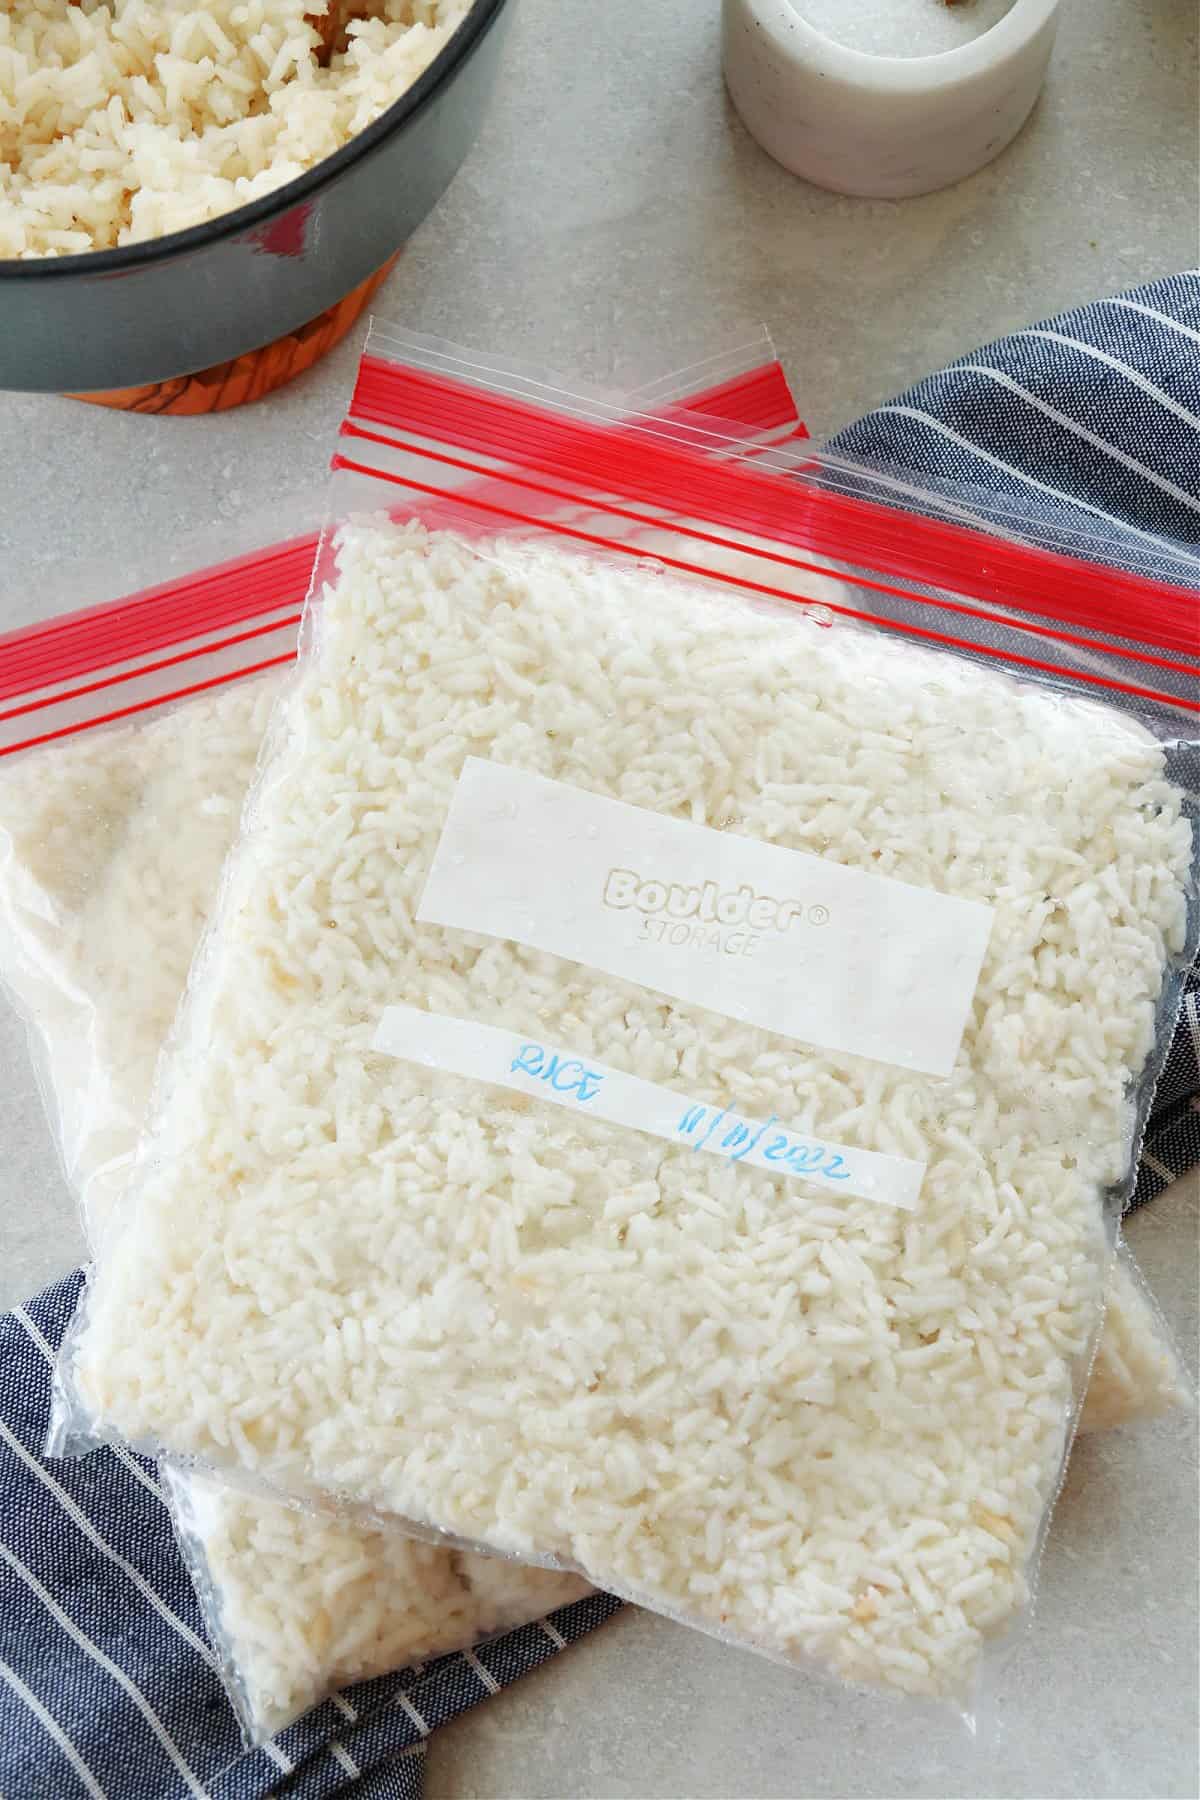 Cooked rice in two freezer bags on a gray board.